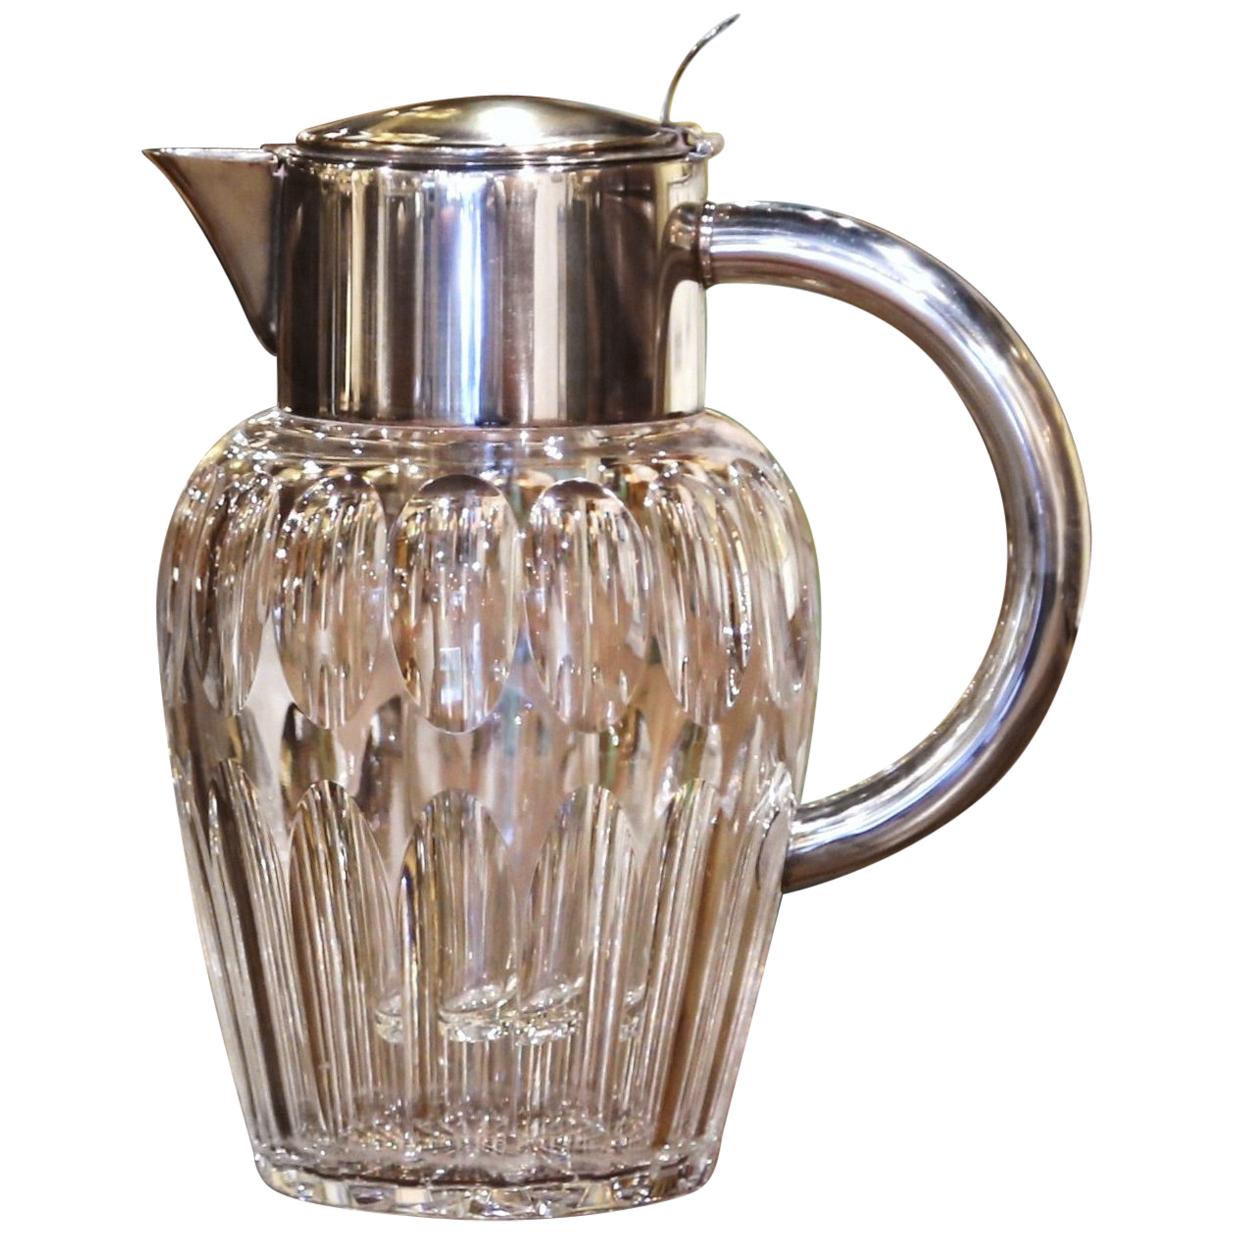 https://a.1stdibscdn.com/midcentury-french-cut-glass-and-silvered-brass-pitcher-with-ice-holder-insert-for-sale/1121189/f_223594221612436189272/22359422_master.jpeg